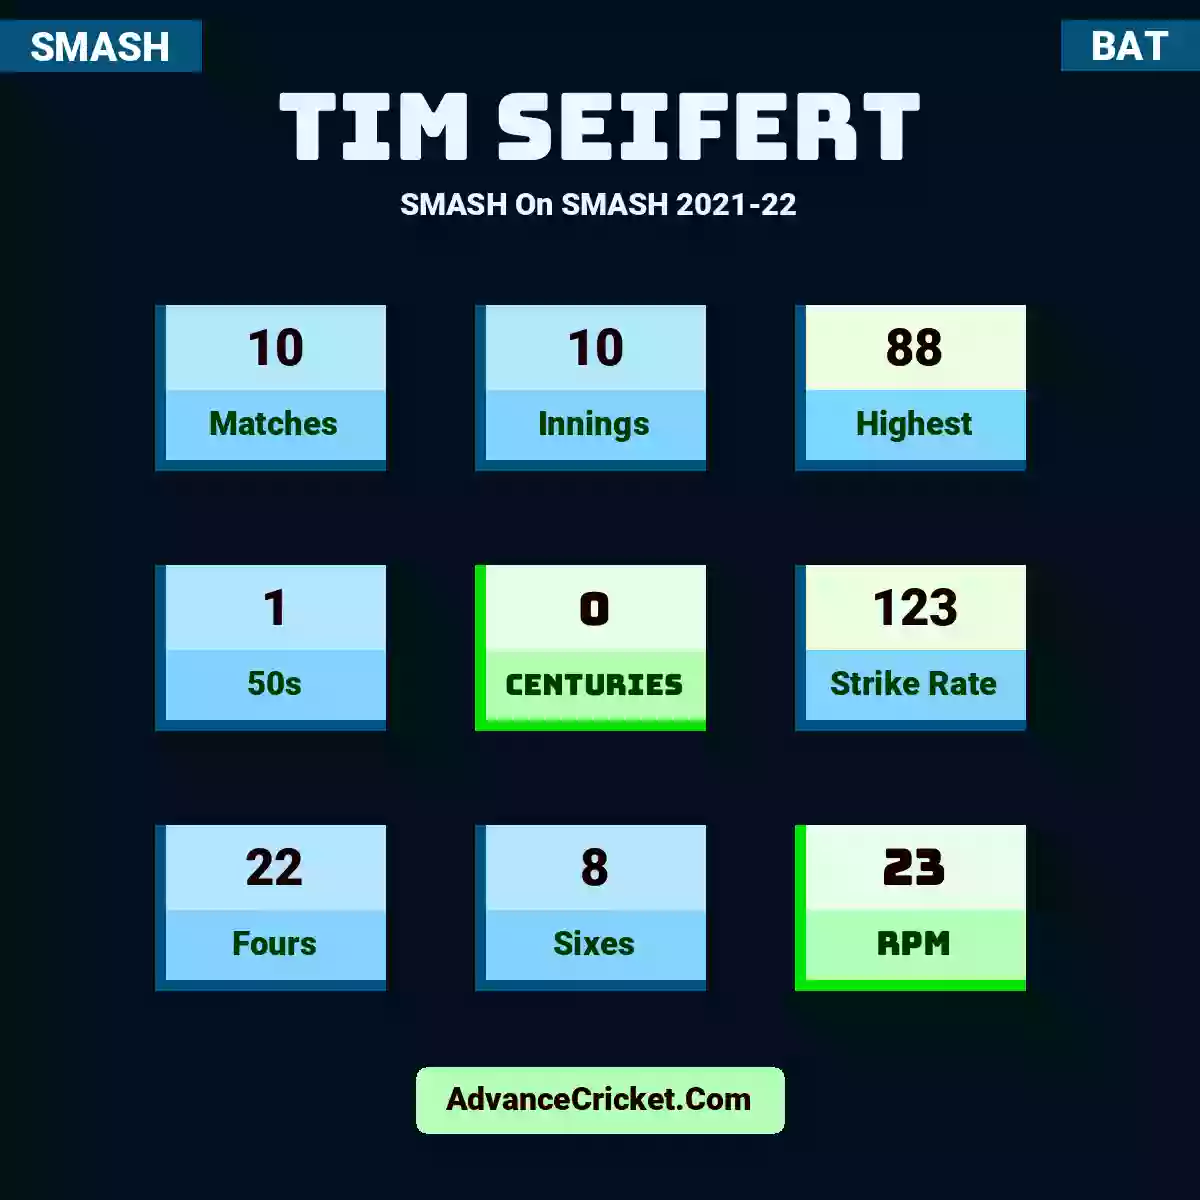 Tim Seifert SMASH  On SMASH 2021-22, Tim Seifert played 10 matches, scored 88 runs as highest, 1 half-centuries, and 0 centuries, with a strike rate of 123. T.Seifert hit 22 fours and 8 sixes, with an RPM of 23.